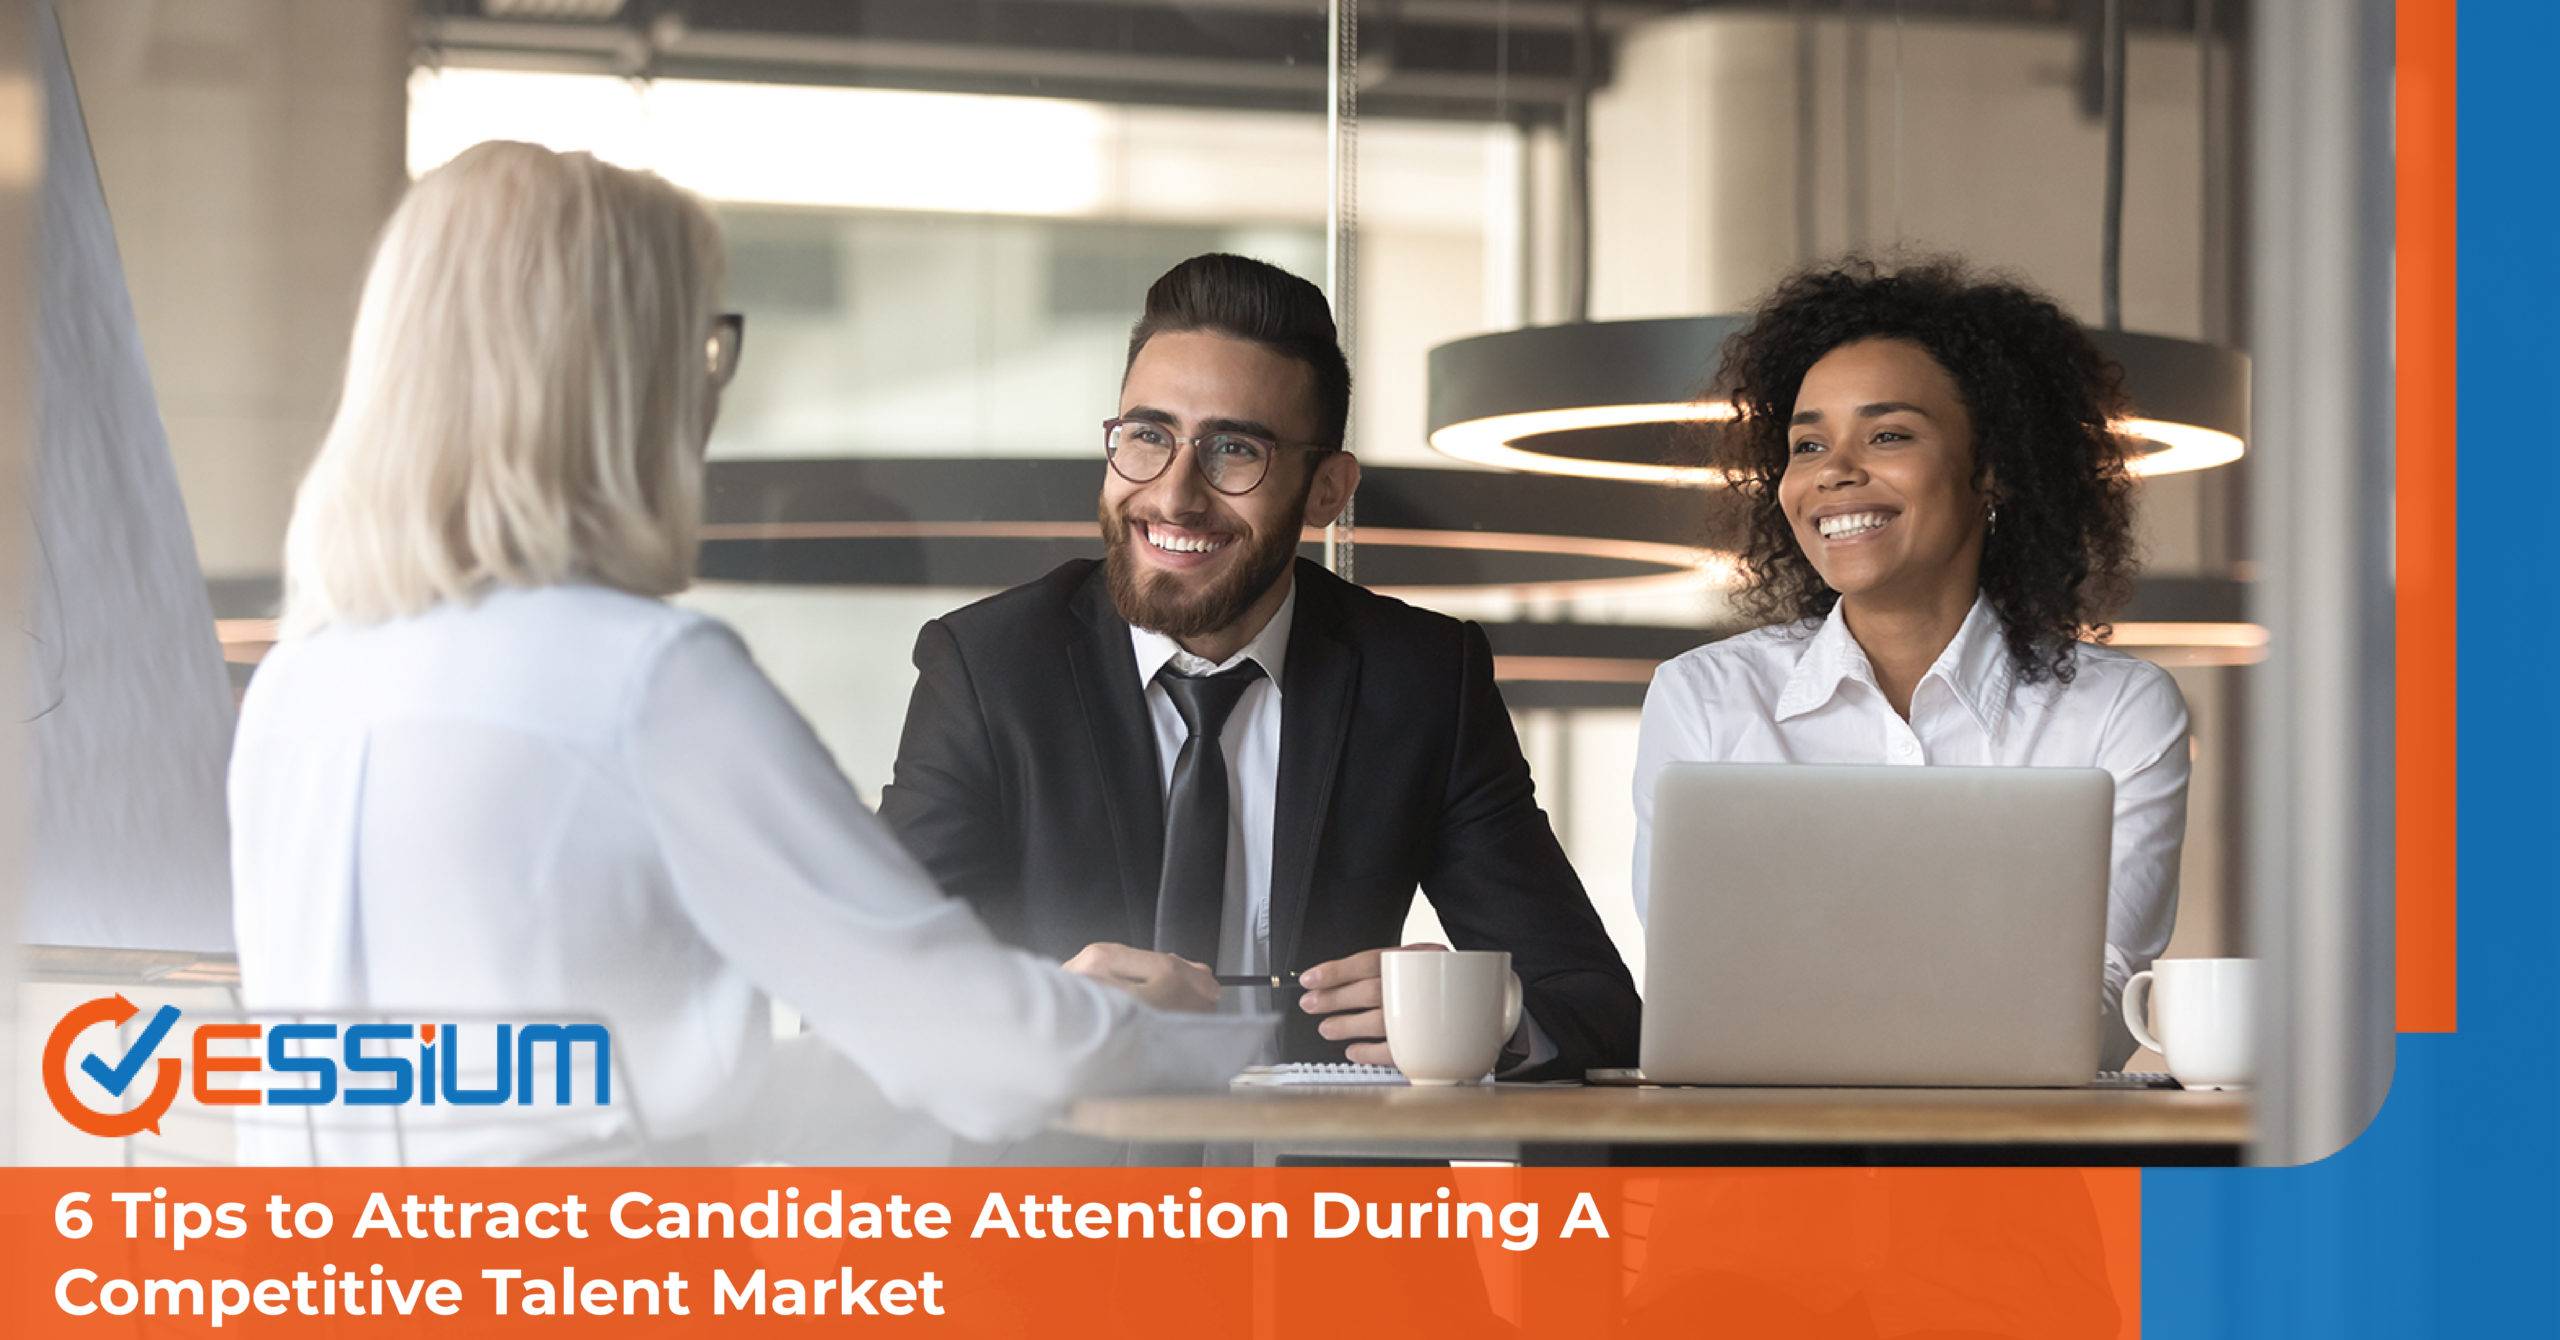 6 Tips to Attract Candidate Attention During A Competitive Talent Market